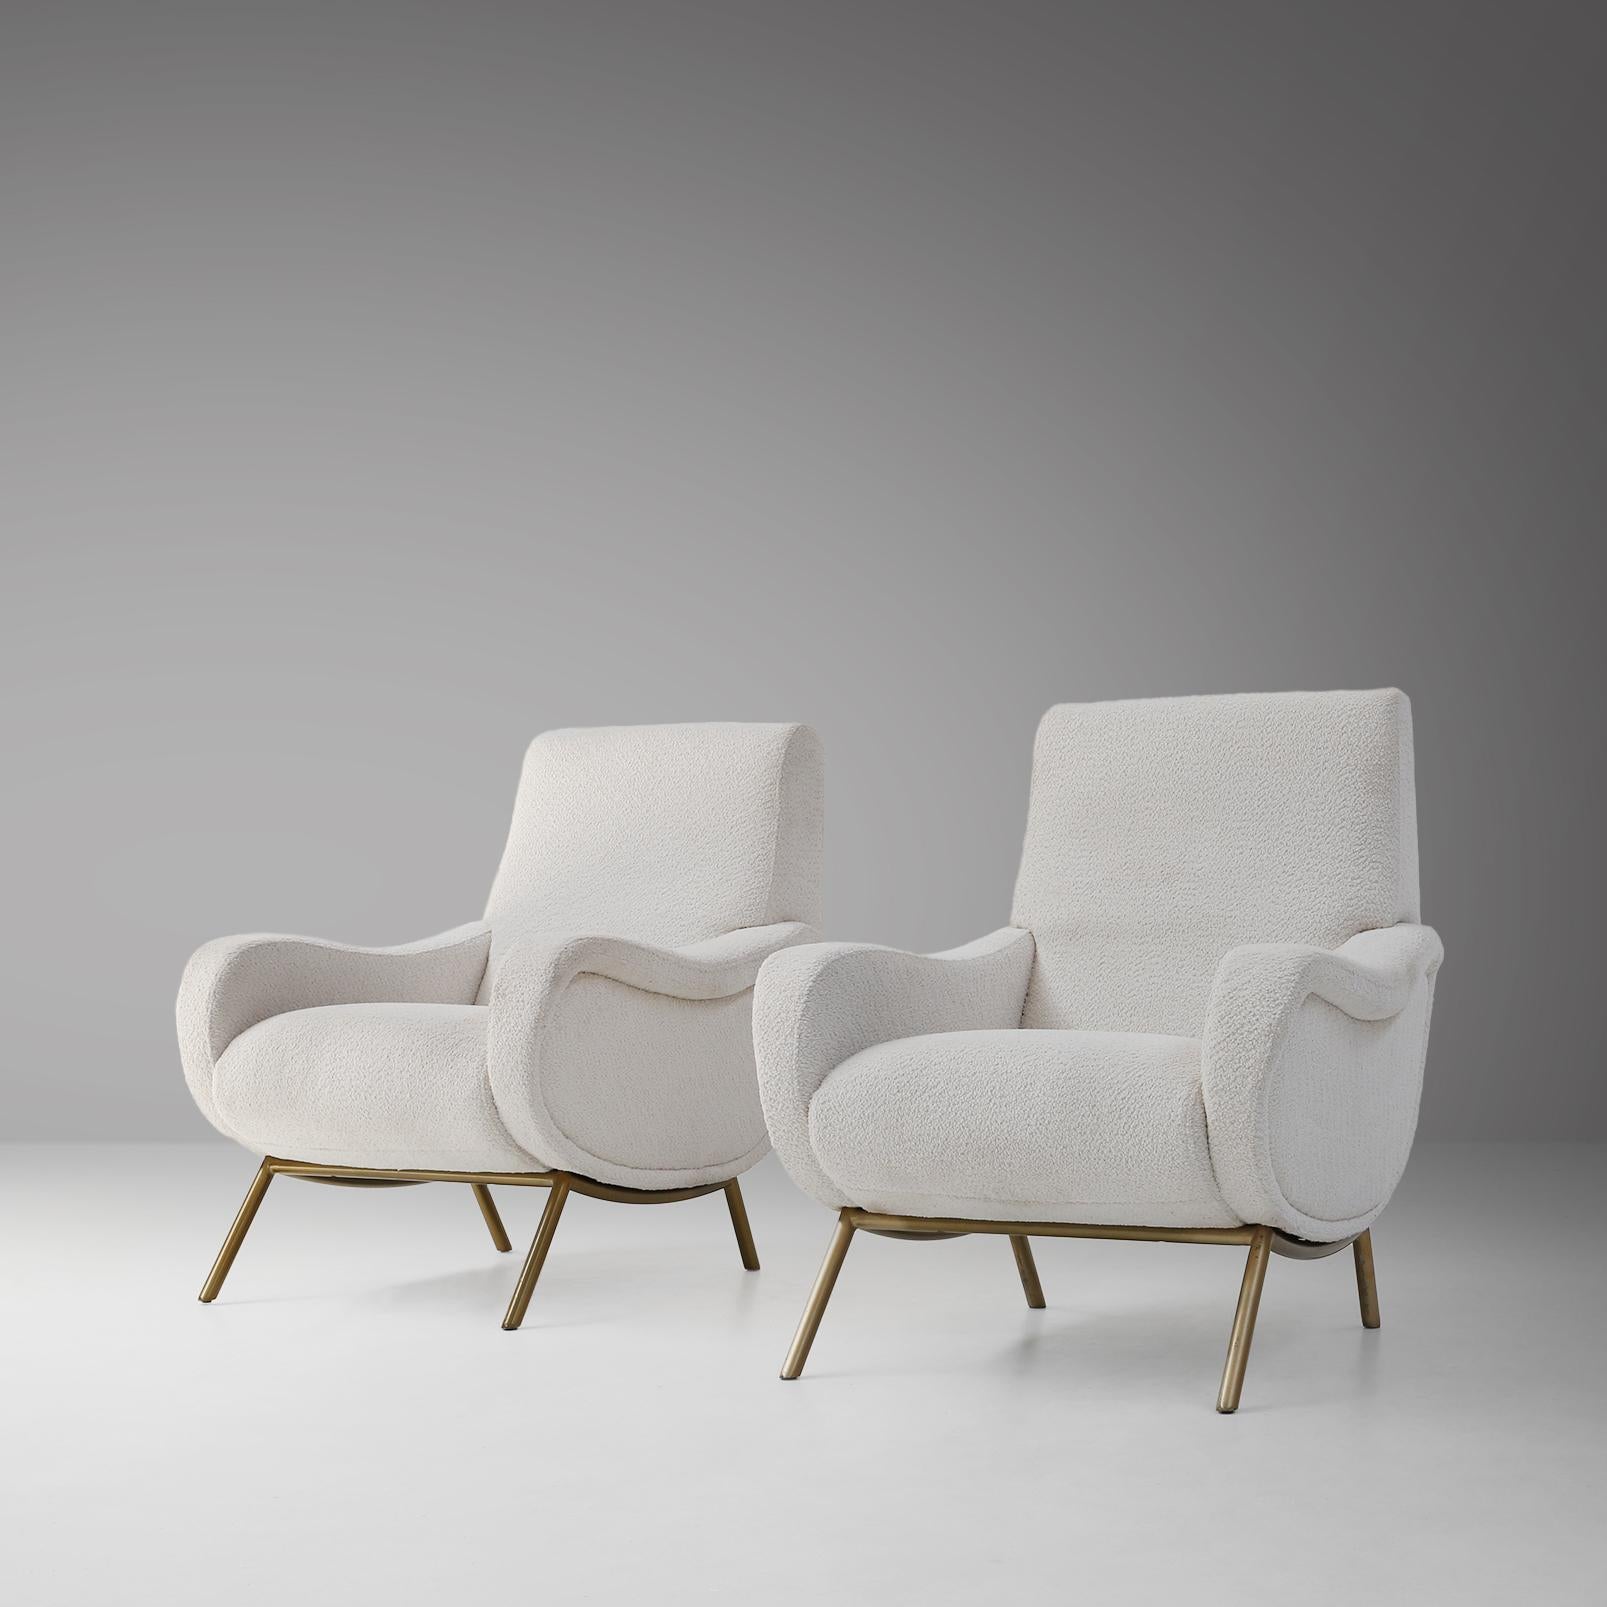 Designed in 1951 by Italian architect and furniture maker Marco Zanuso, these iconic chairs are a symbol of stylish, material and technological innovation. They won a gold medal at the Milan Triennale in the year of their debut.

The Lady chairs